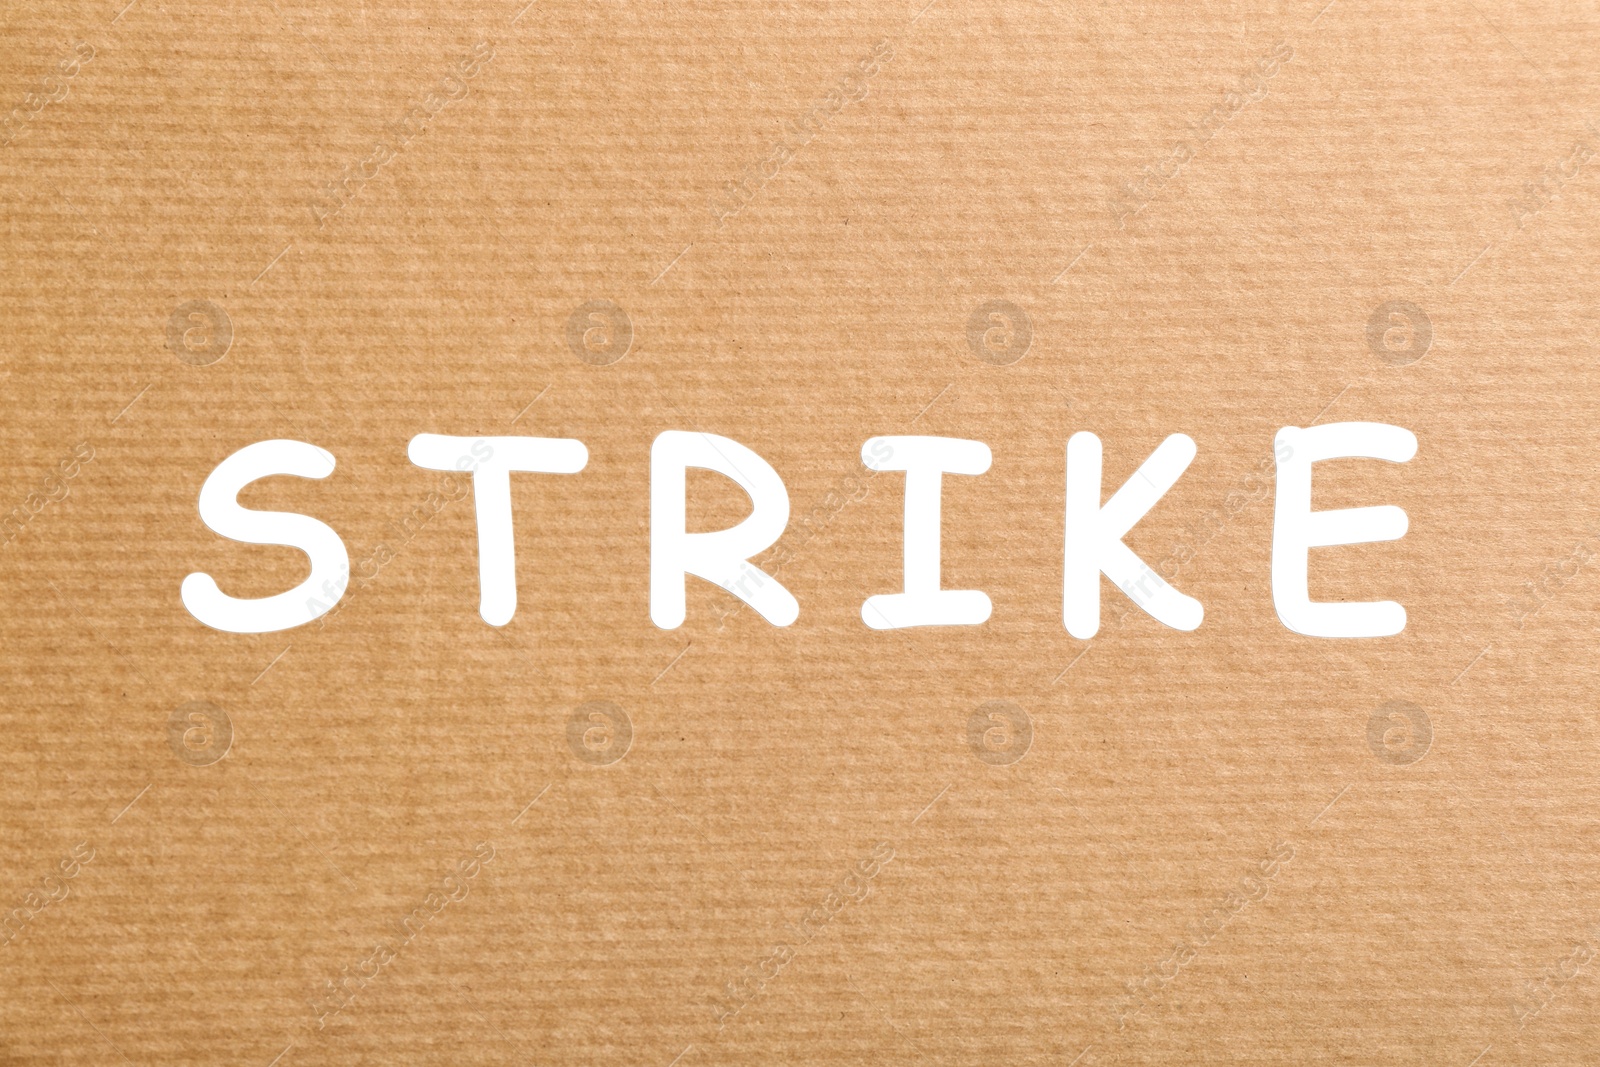 Image of Protest concept. Word Strike on kraft paper